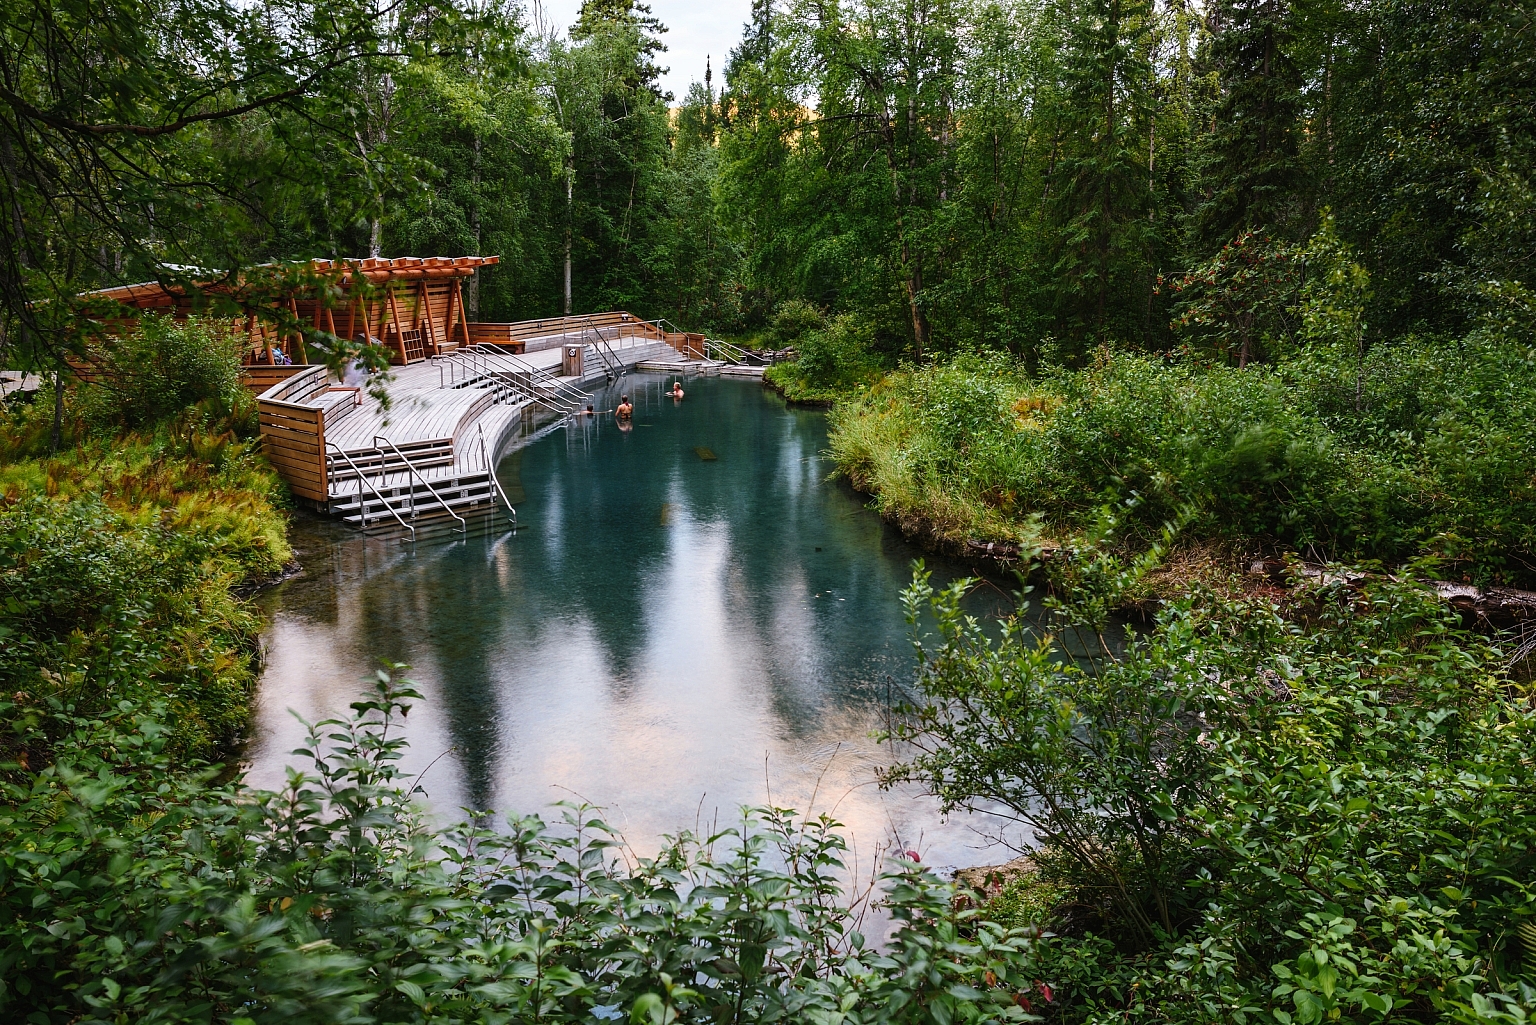 People soaking in the Liard River Hot Springs, mineral baths surrounded by lush forest.